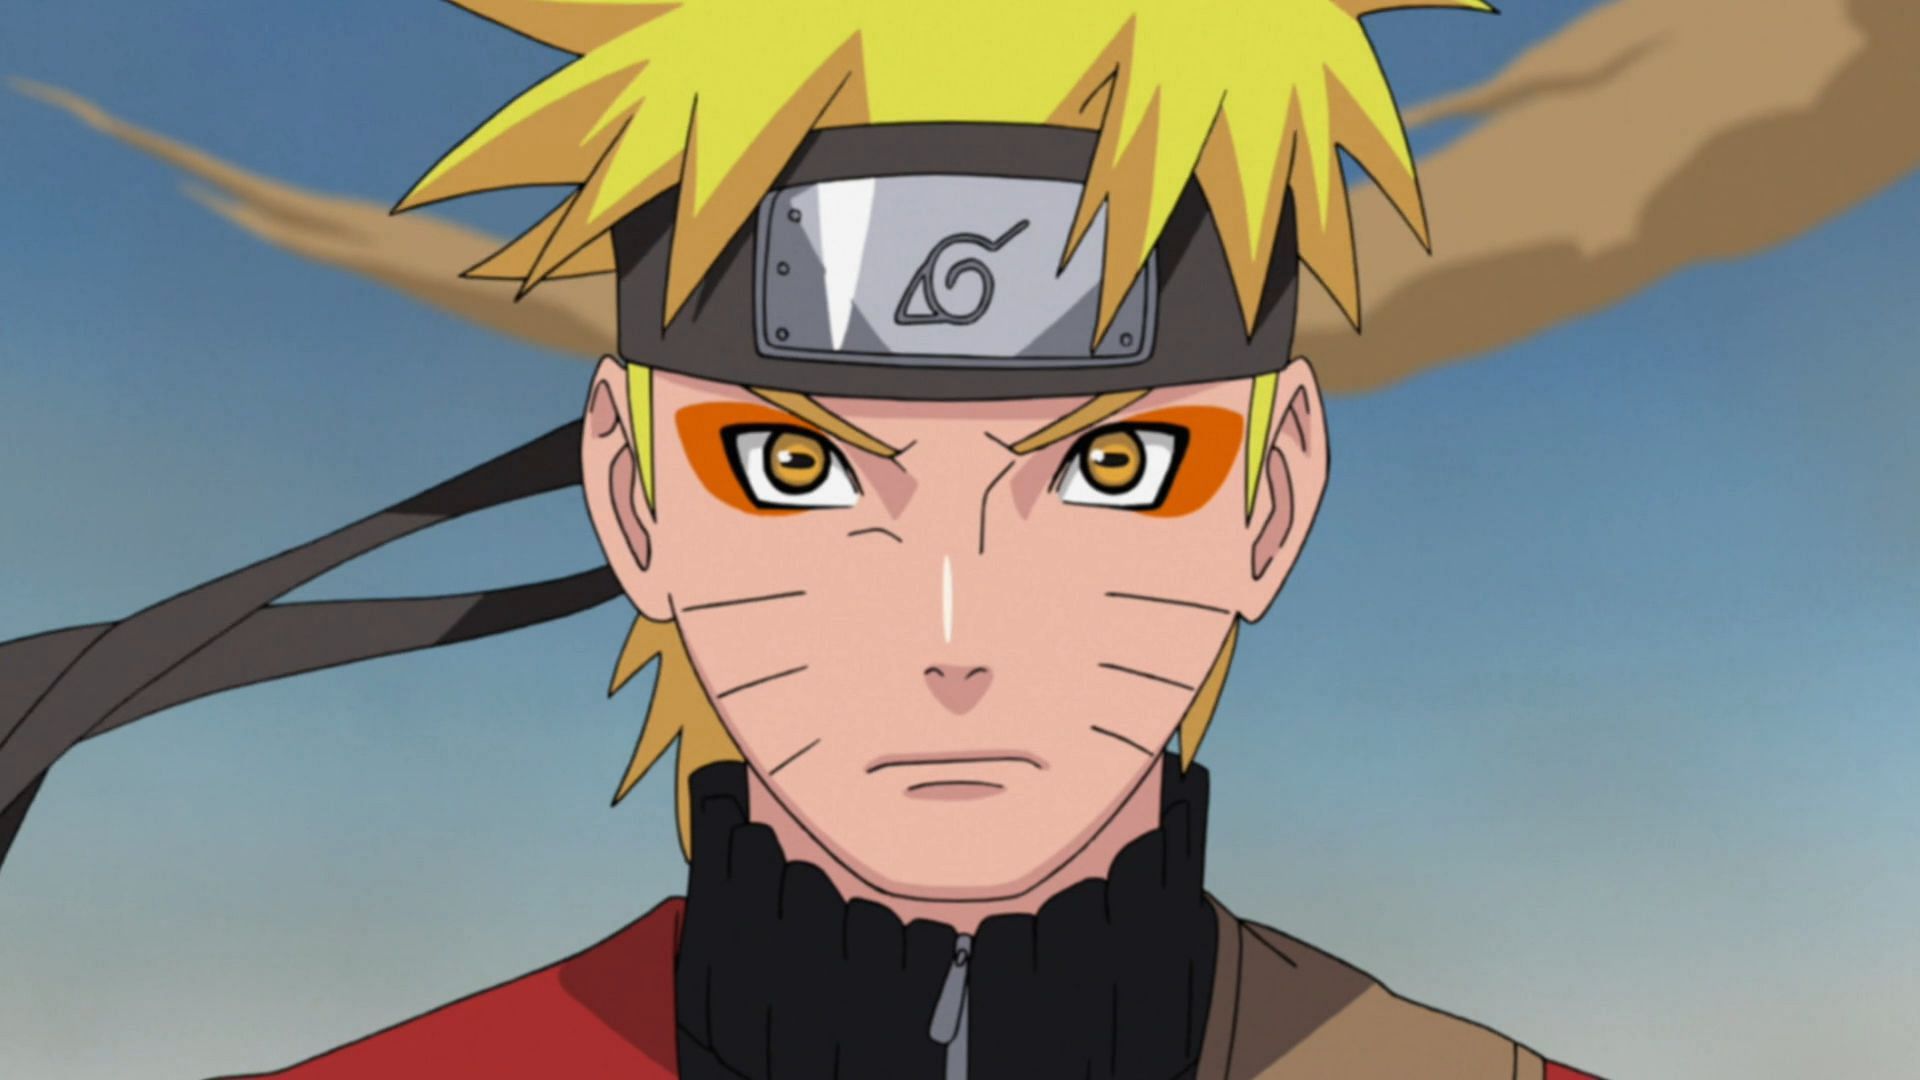 Naruto as seen in the anime (Image via Pierrot)